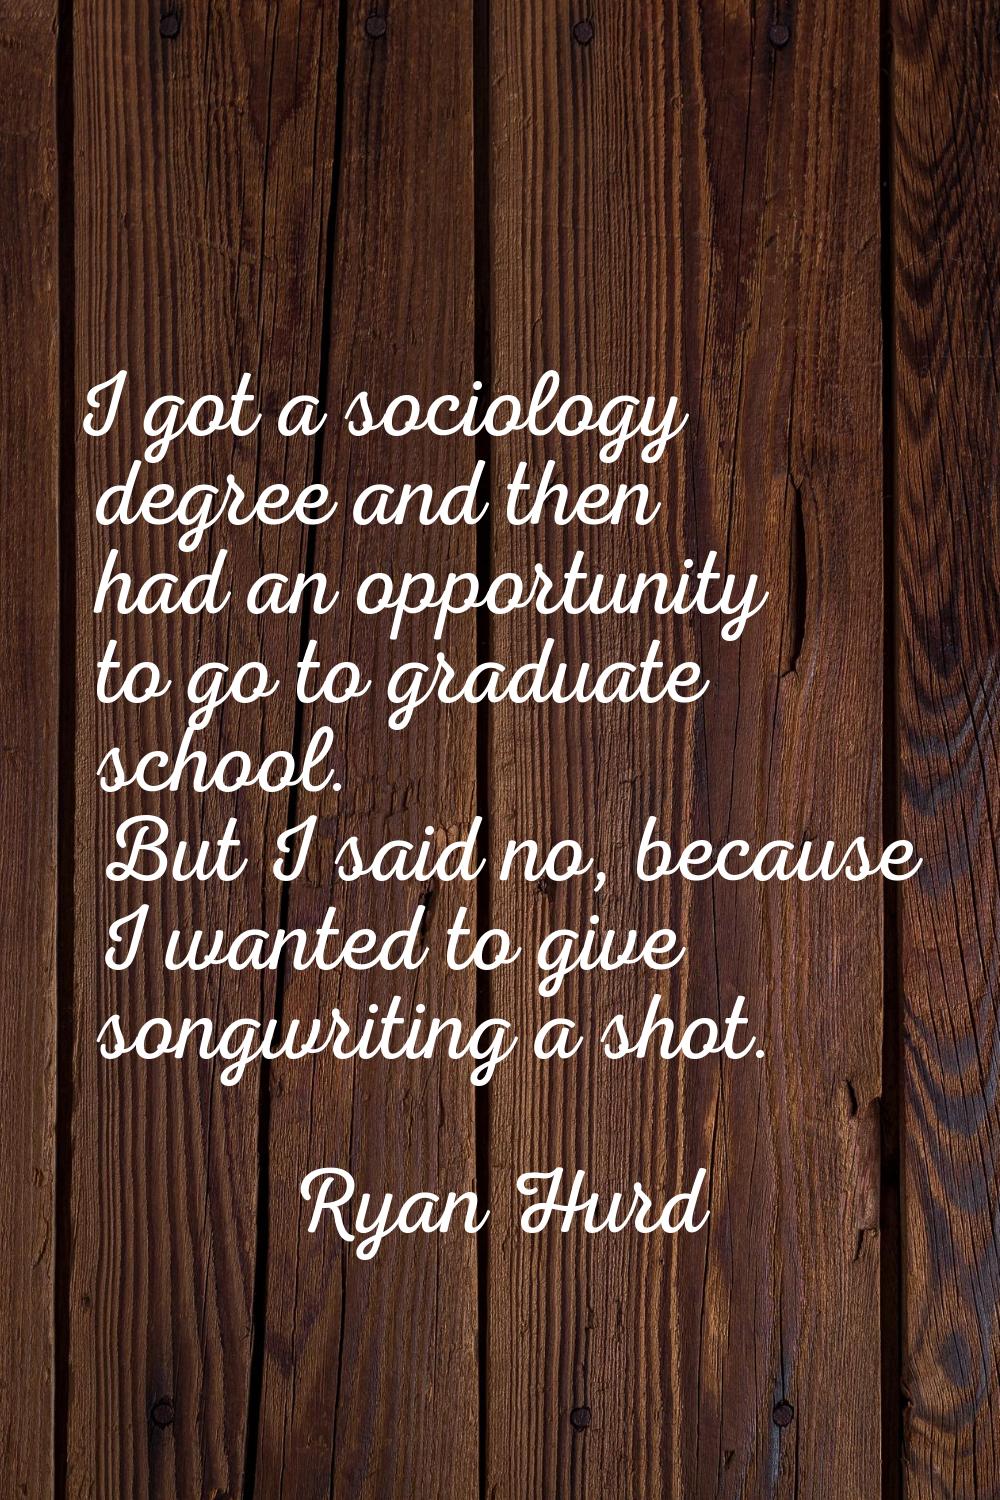 I got a sociology degree and then had an opportunity to go to graduate school. But I said no, becau